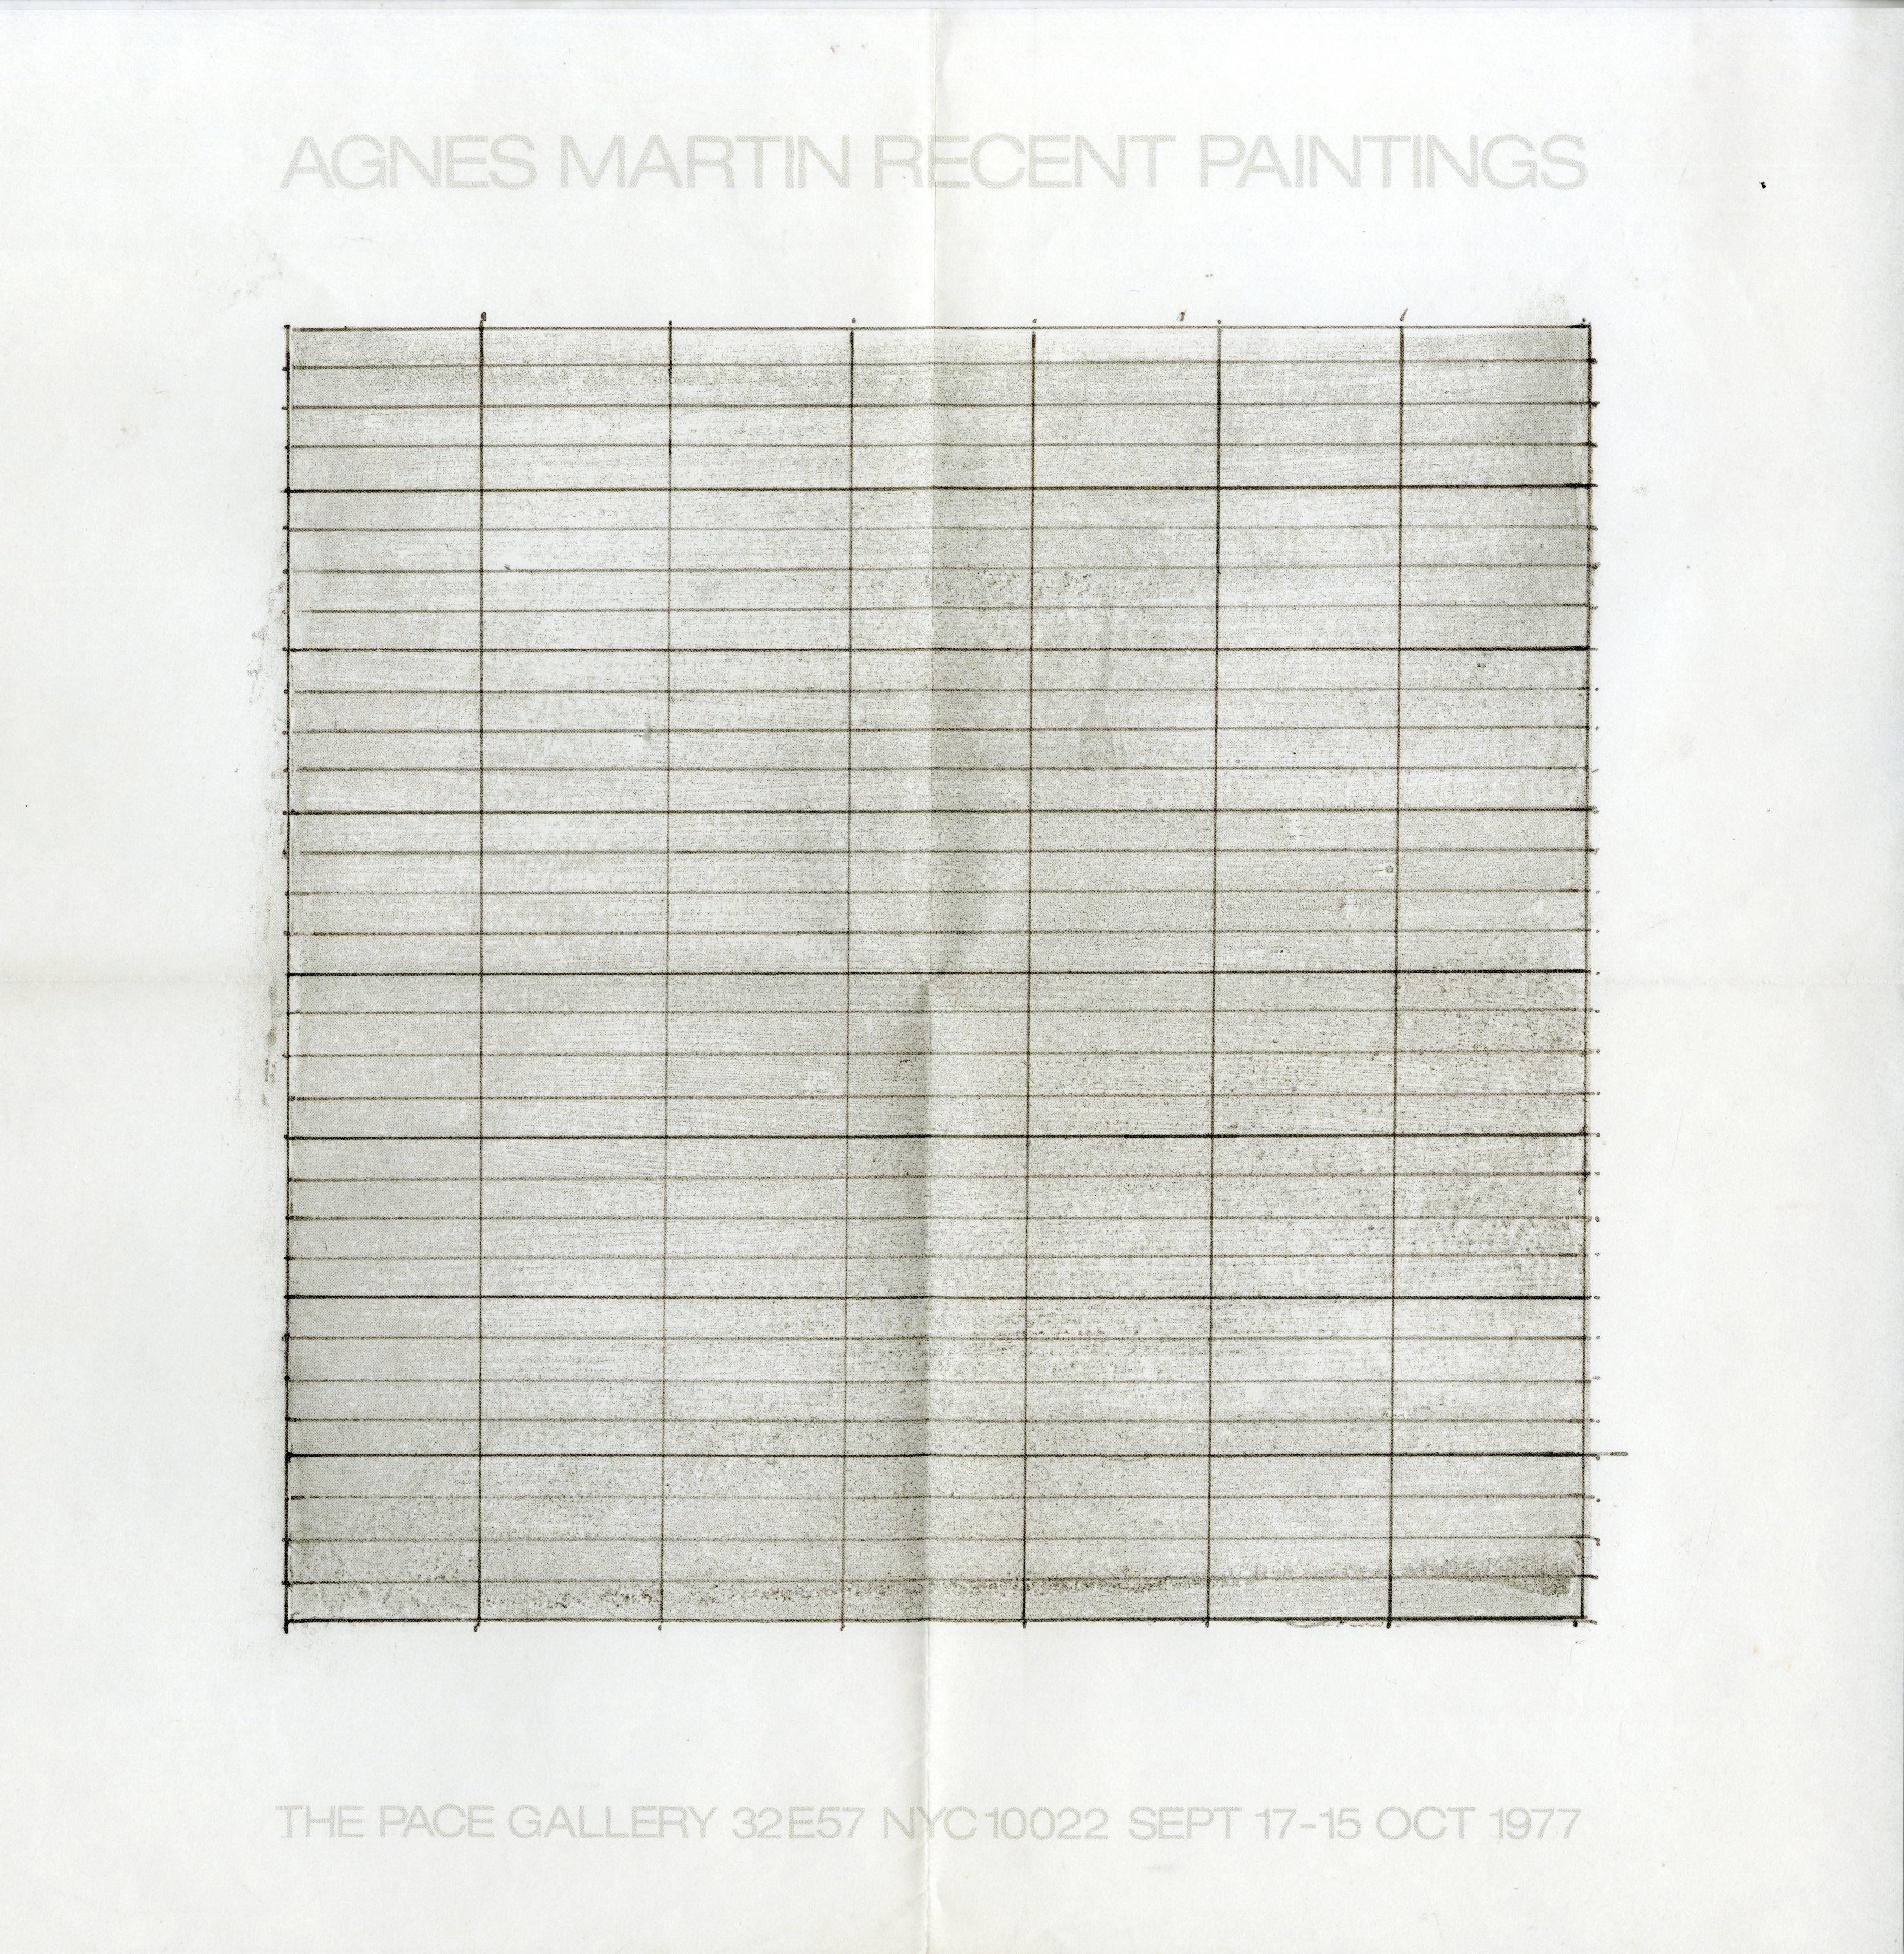 Agnes Martin Recent Paintings